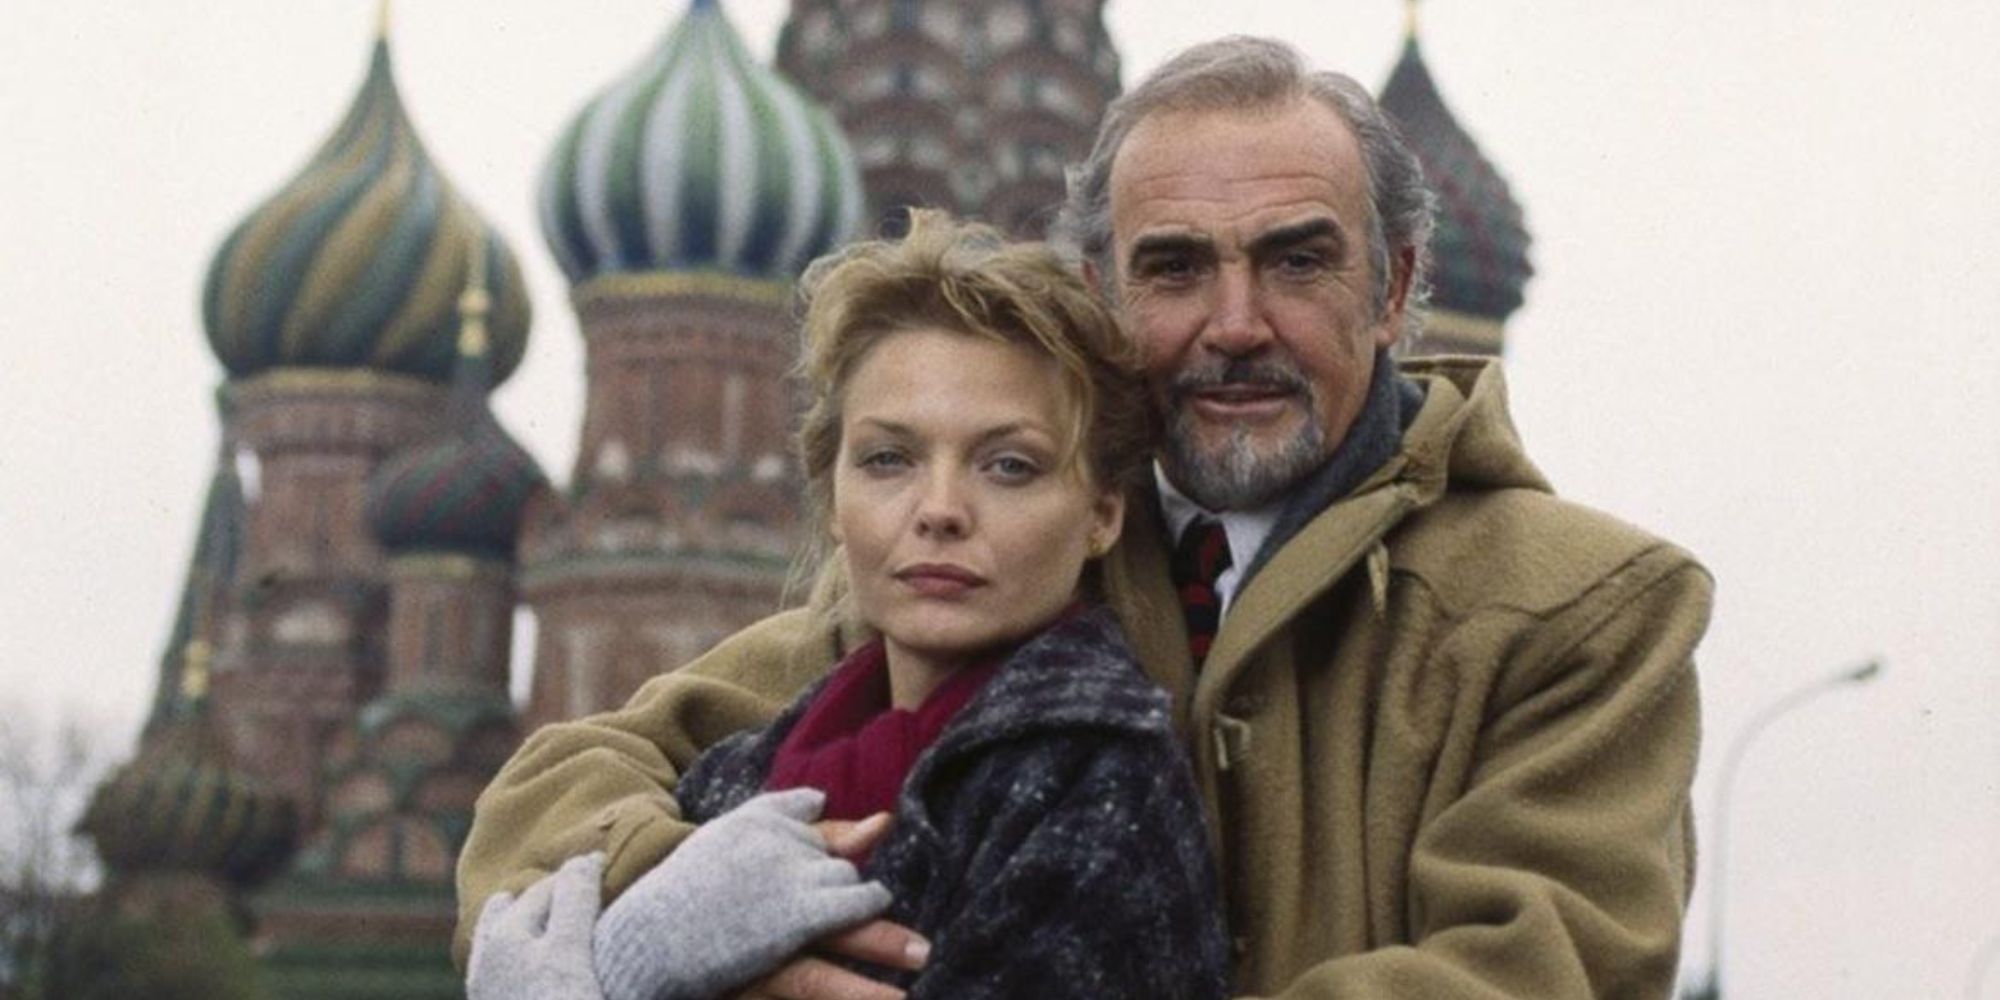 Publicity still from 'The Russia House', with Michelle Pfeiffer and Sean Connery in front of St Basil's Cathedral in Red Square, Moscow